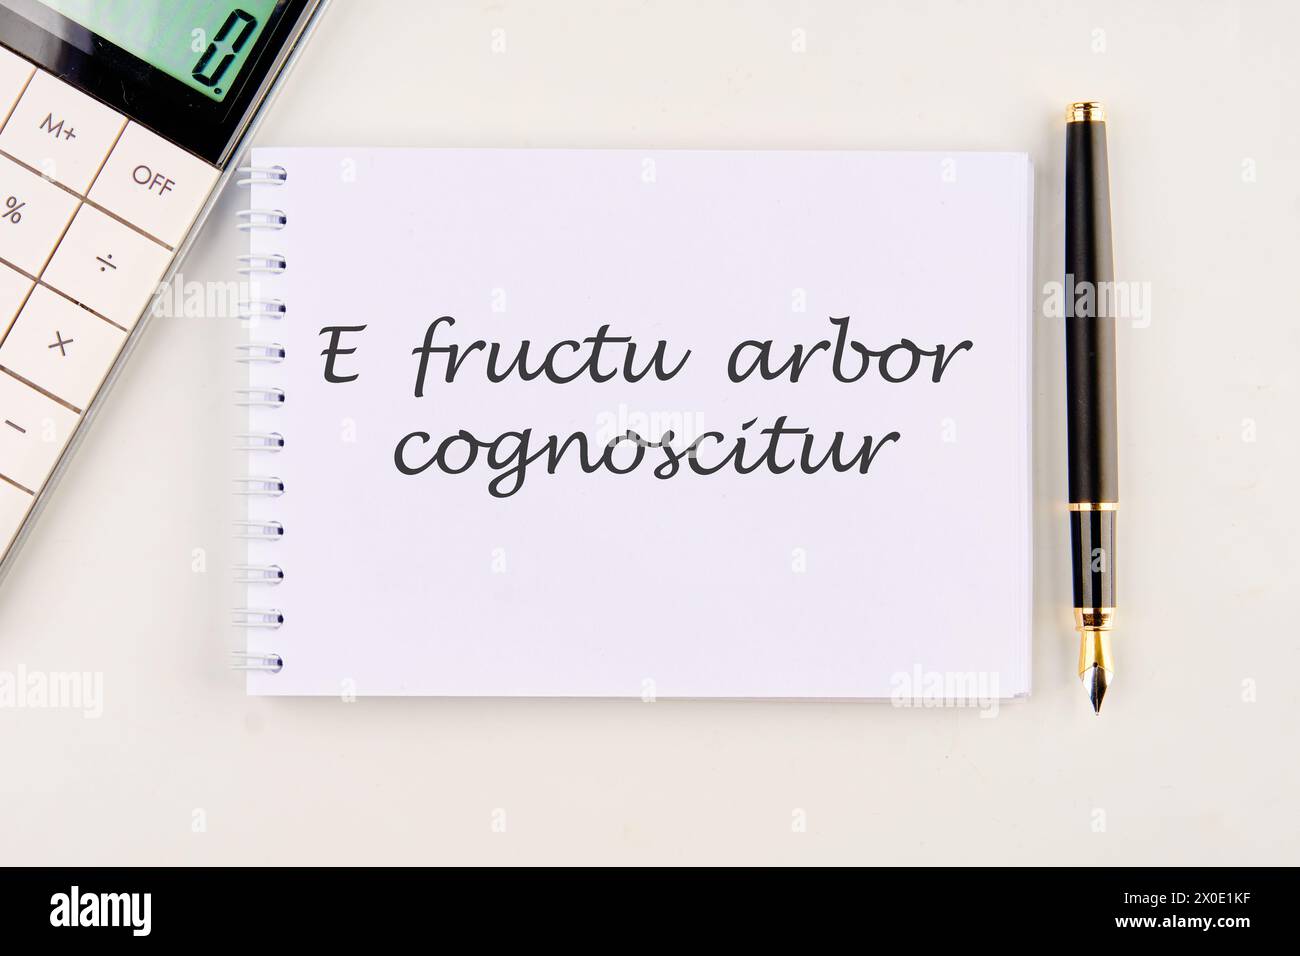 E fructu arbor cognoscitur the phrase in Latin translates as the Tree is known by its fruits on a white notebook Stock Photo